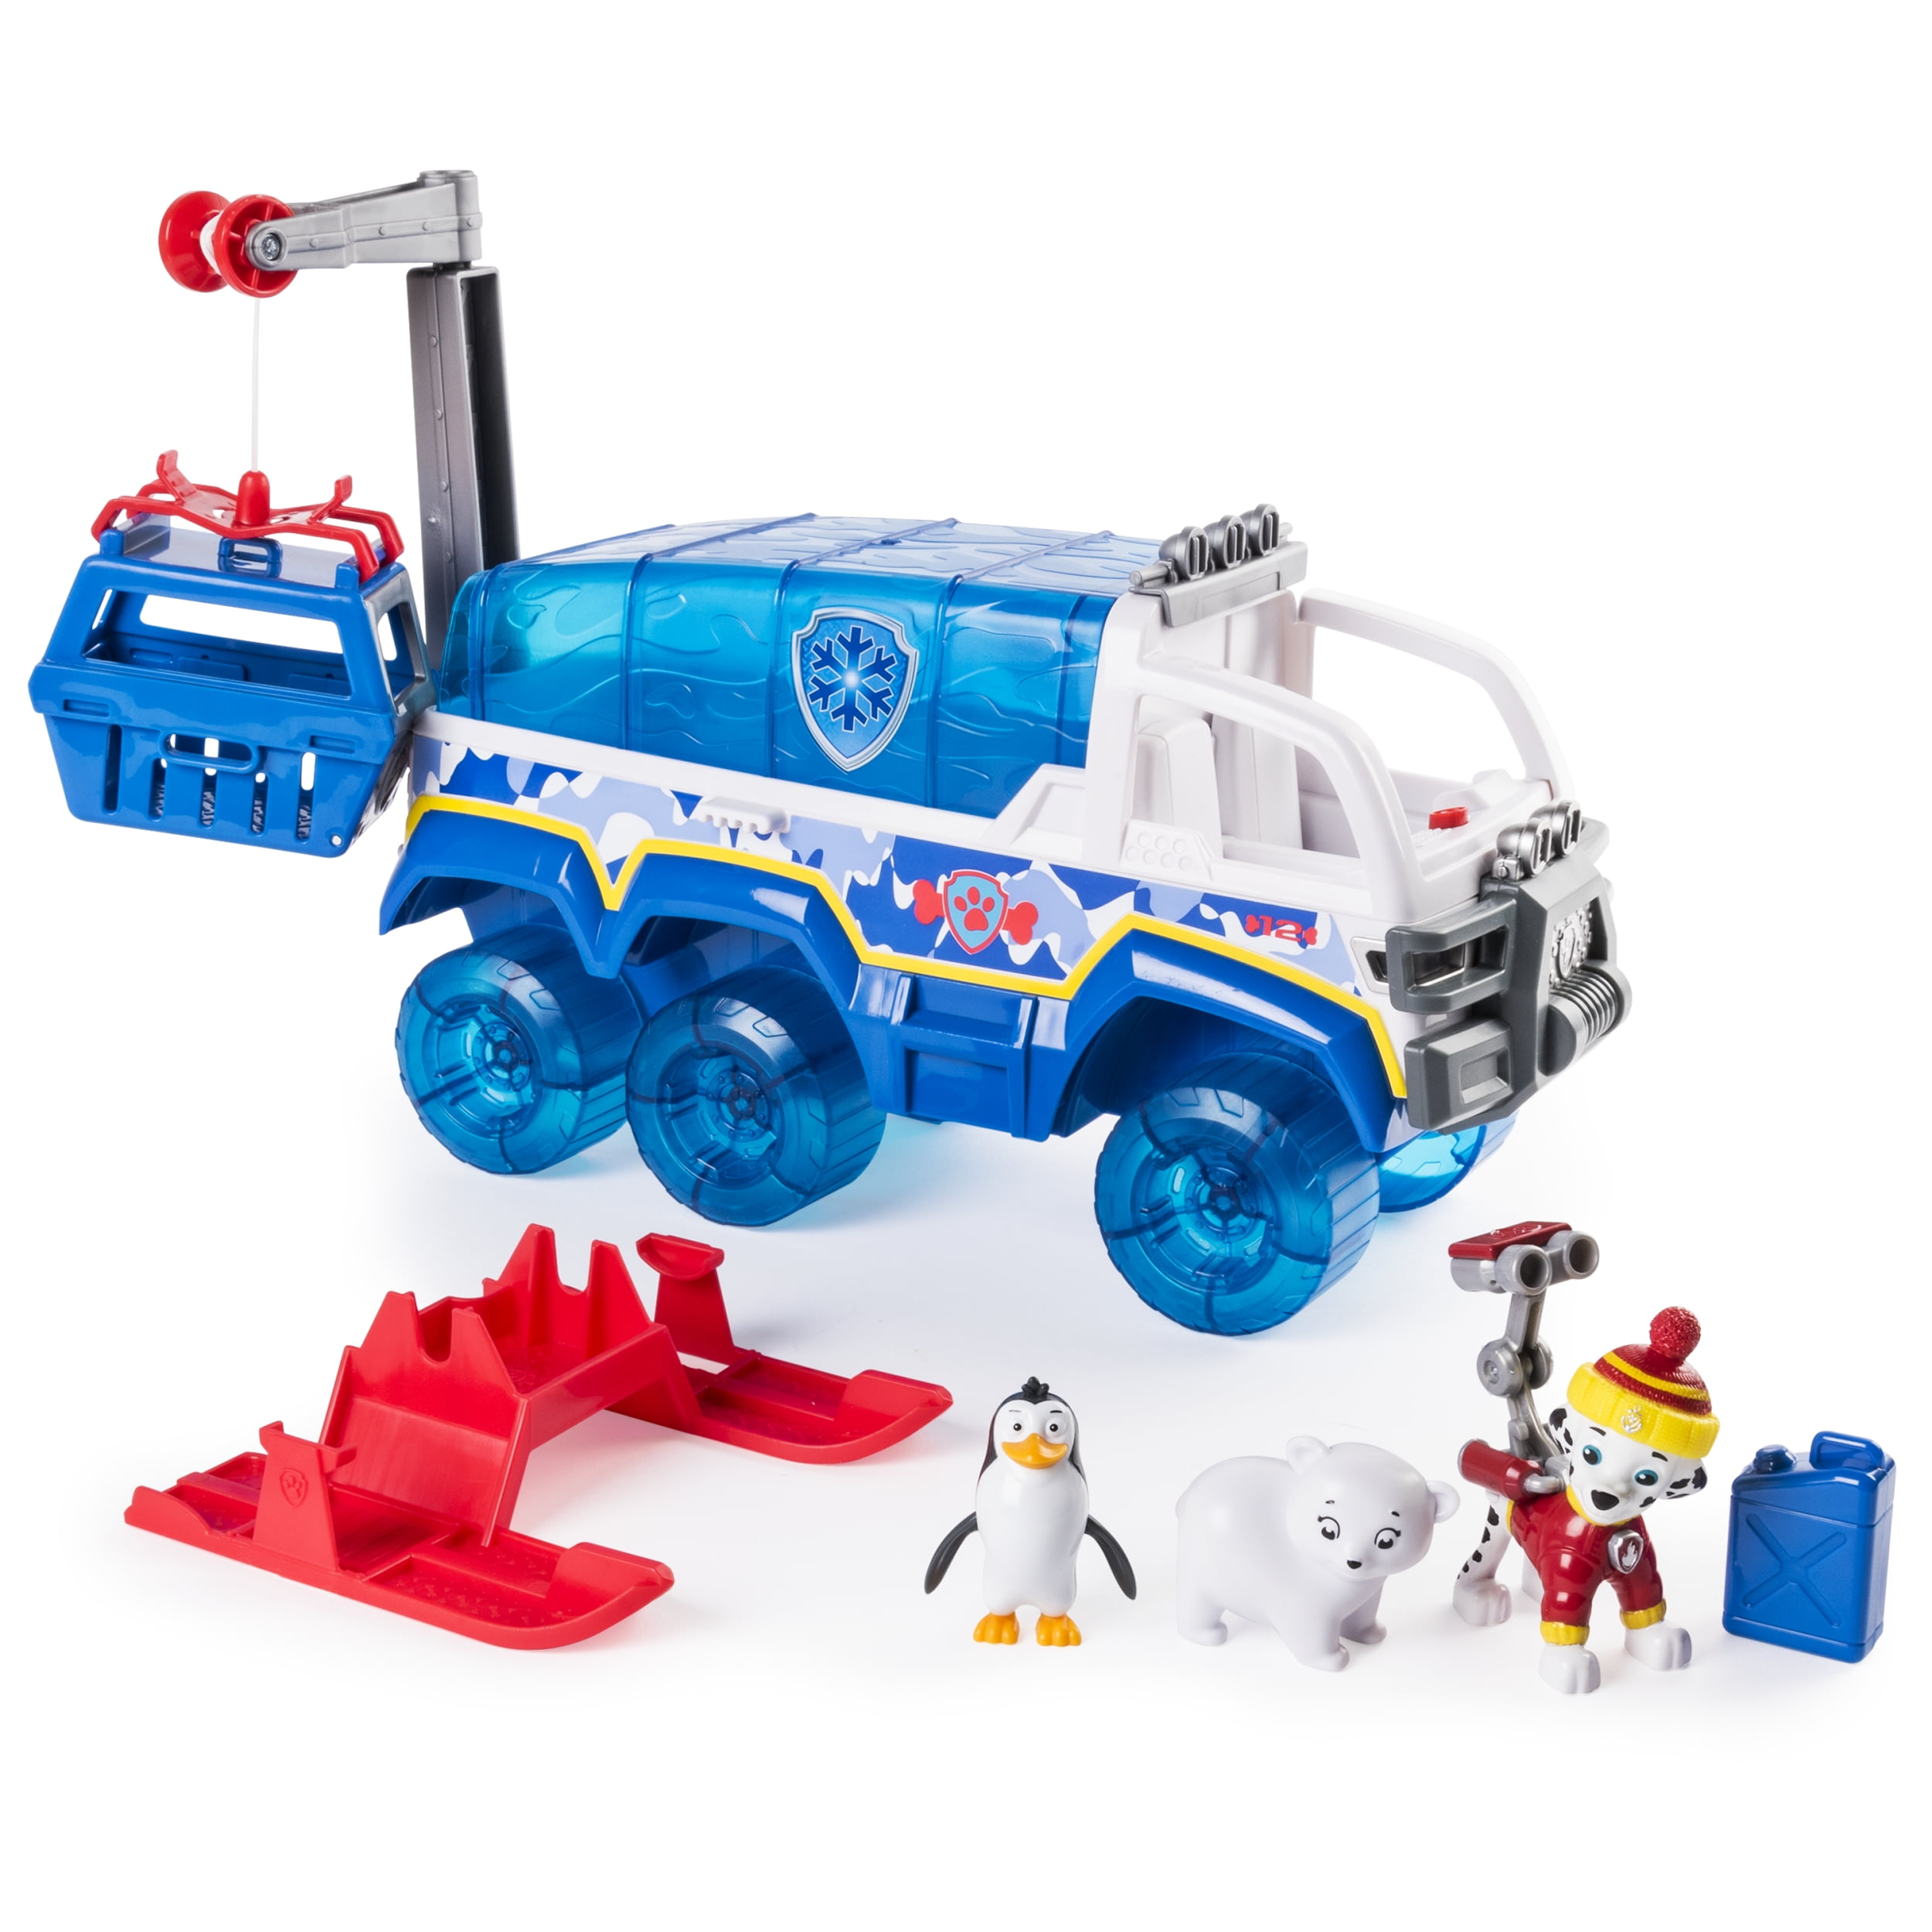 Ringlet kontrollere daytime Paw Patrol Snow Rescue - Arctic Terrain Vehicle Rescue Set with Lights and  Sounds - Wal-Mart Exclusive - Walmart.com